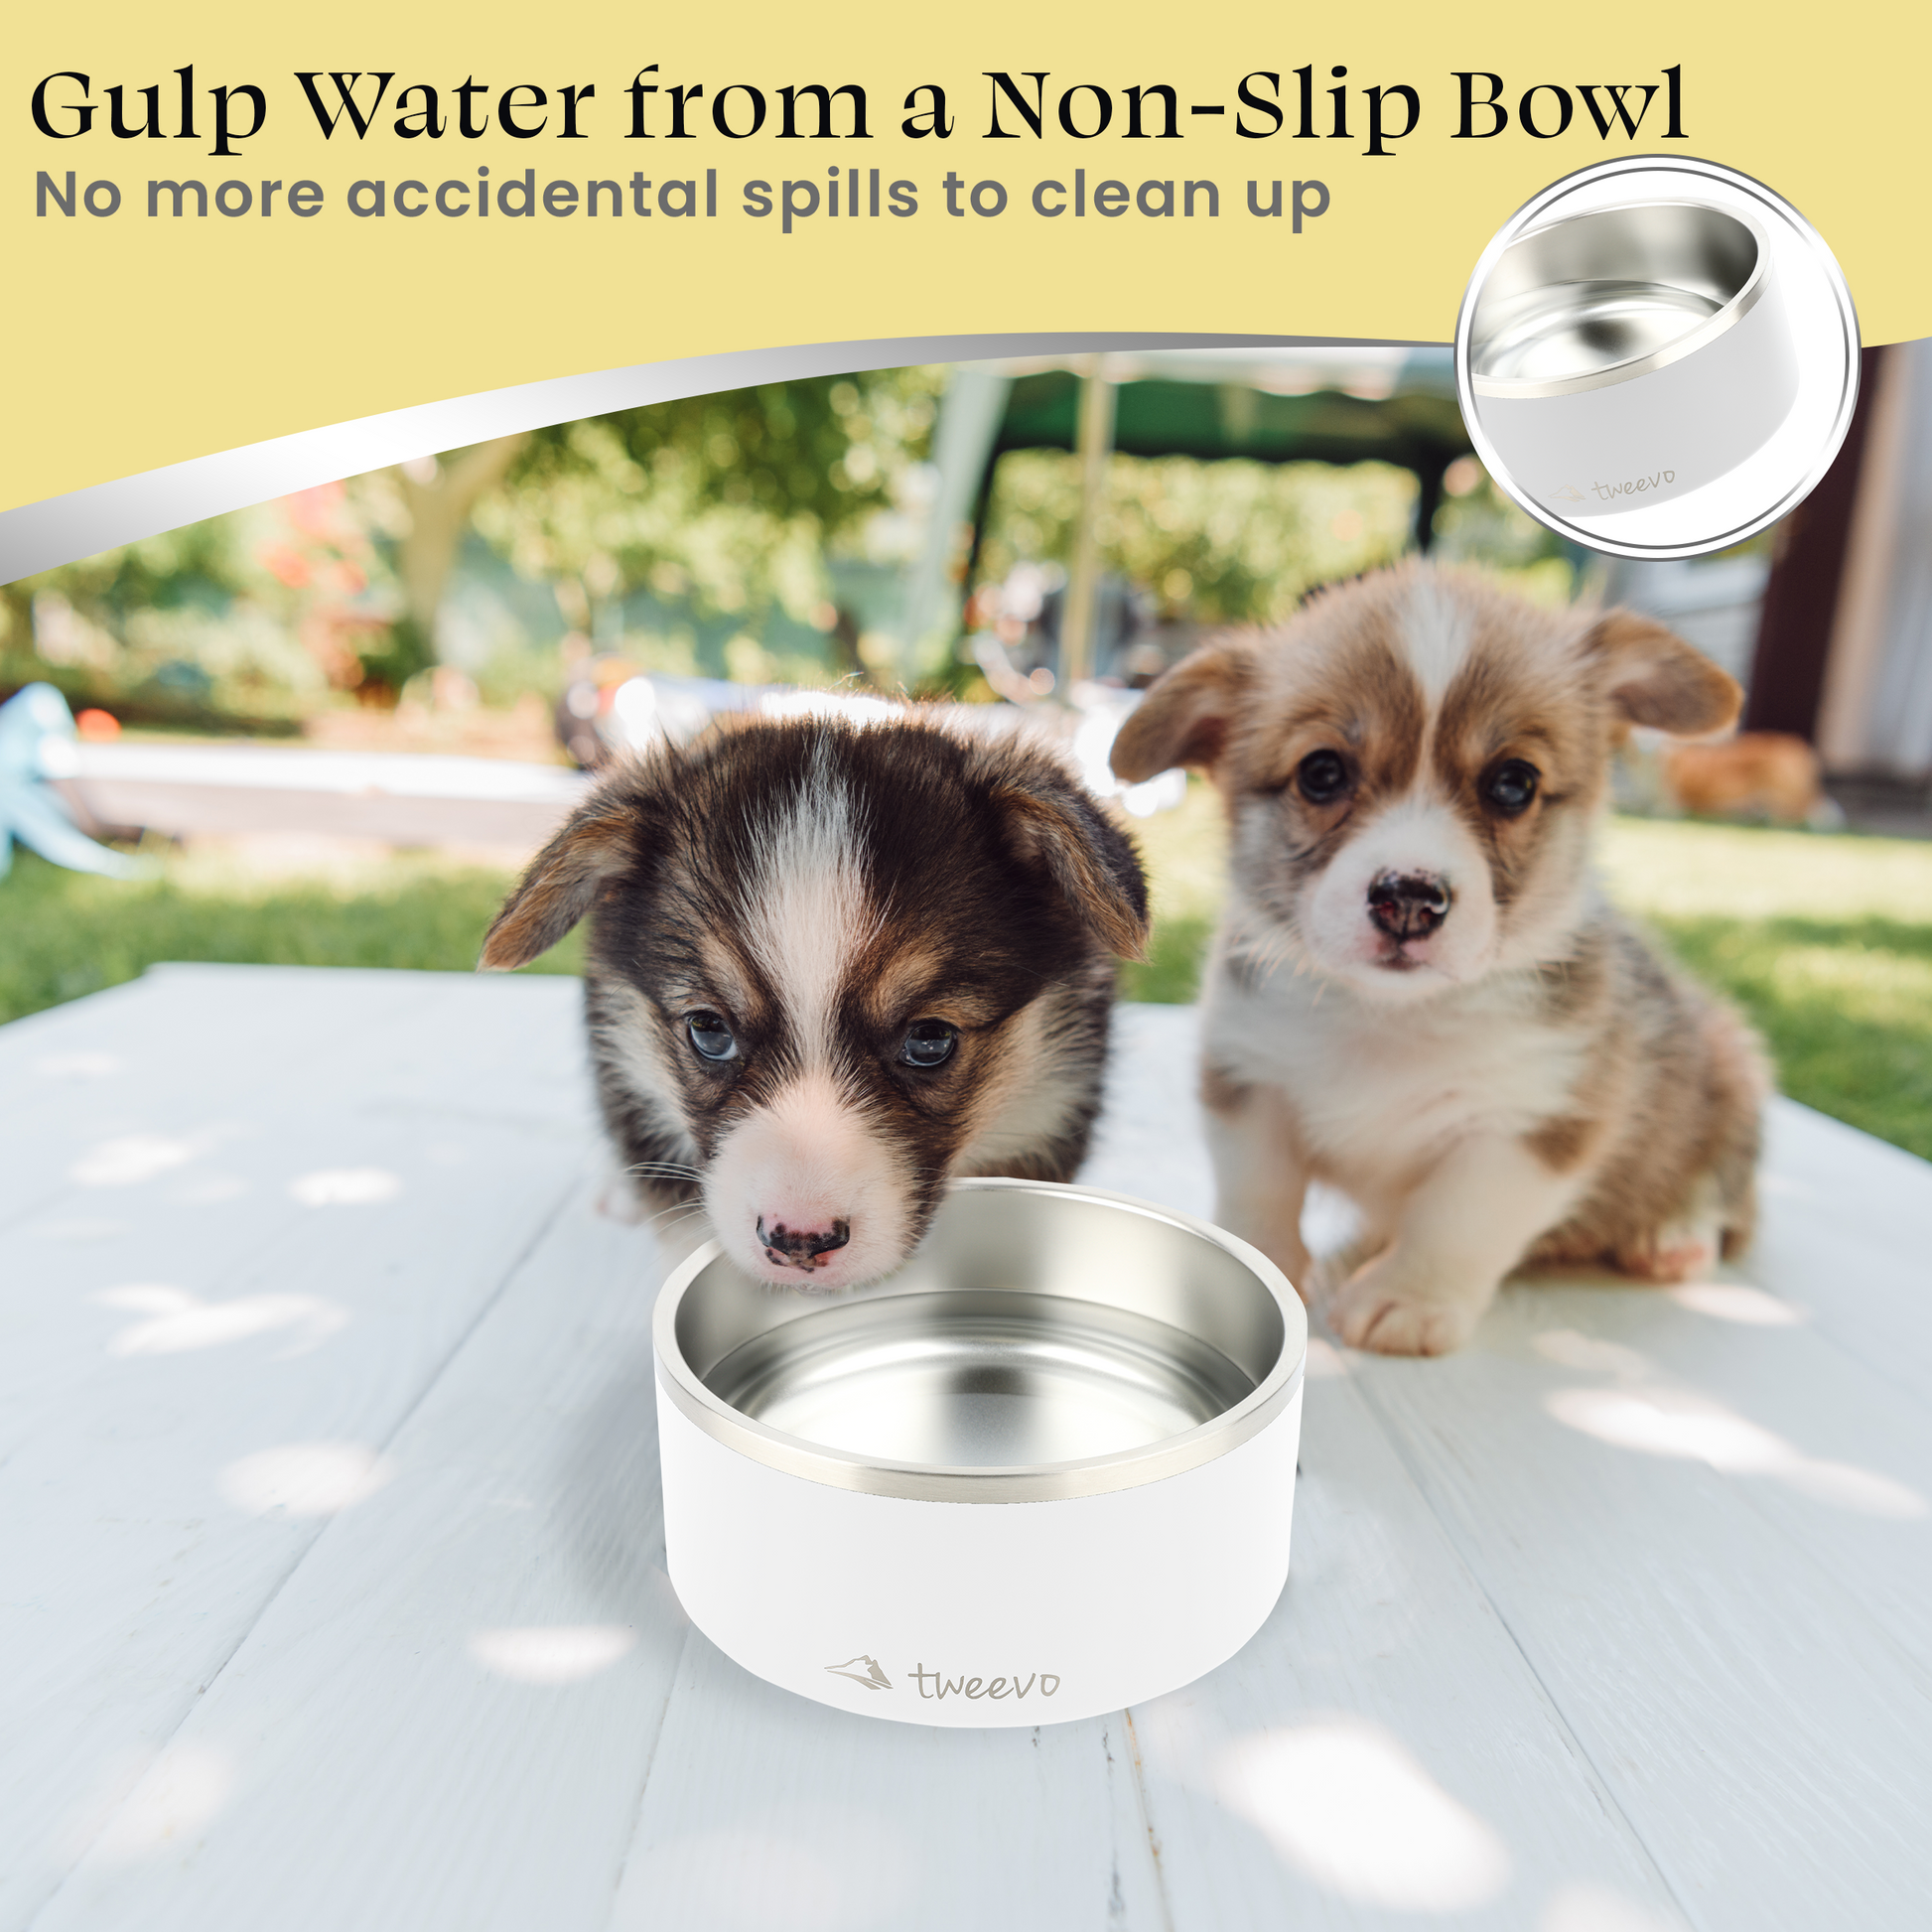 The Most Durable Dog Bowl on the Market